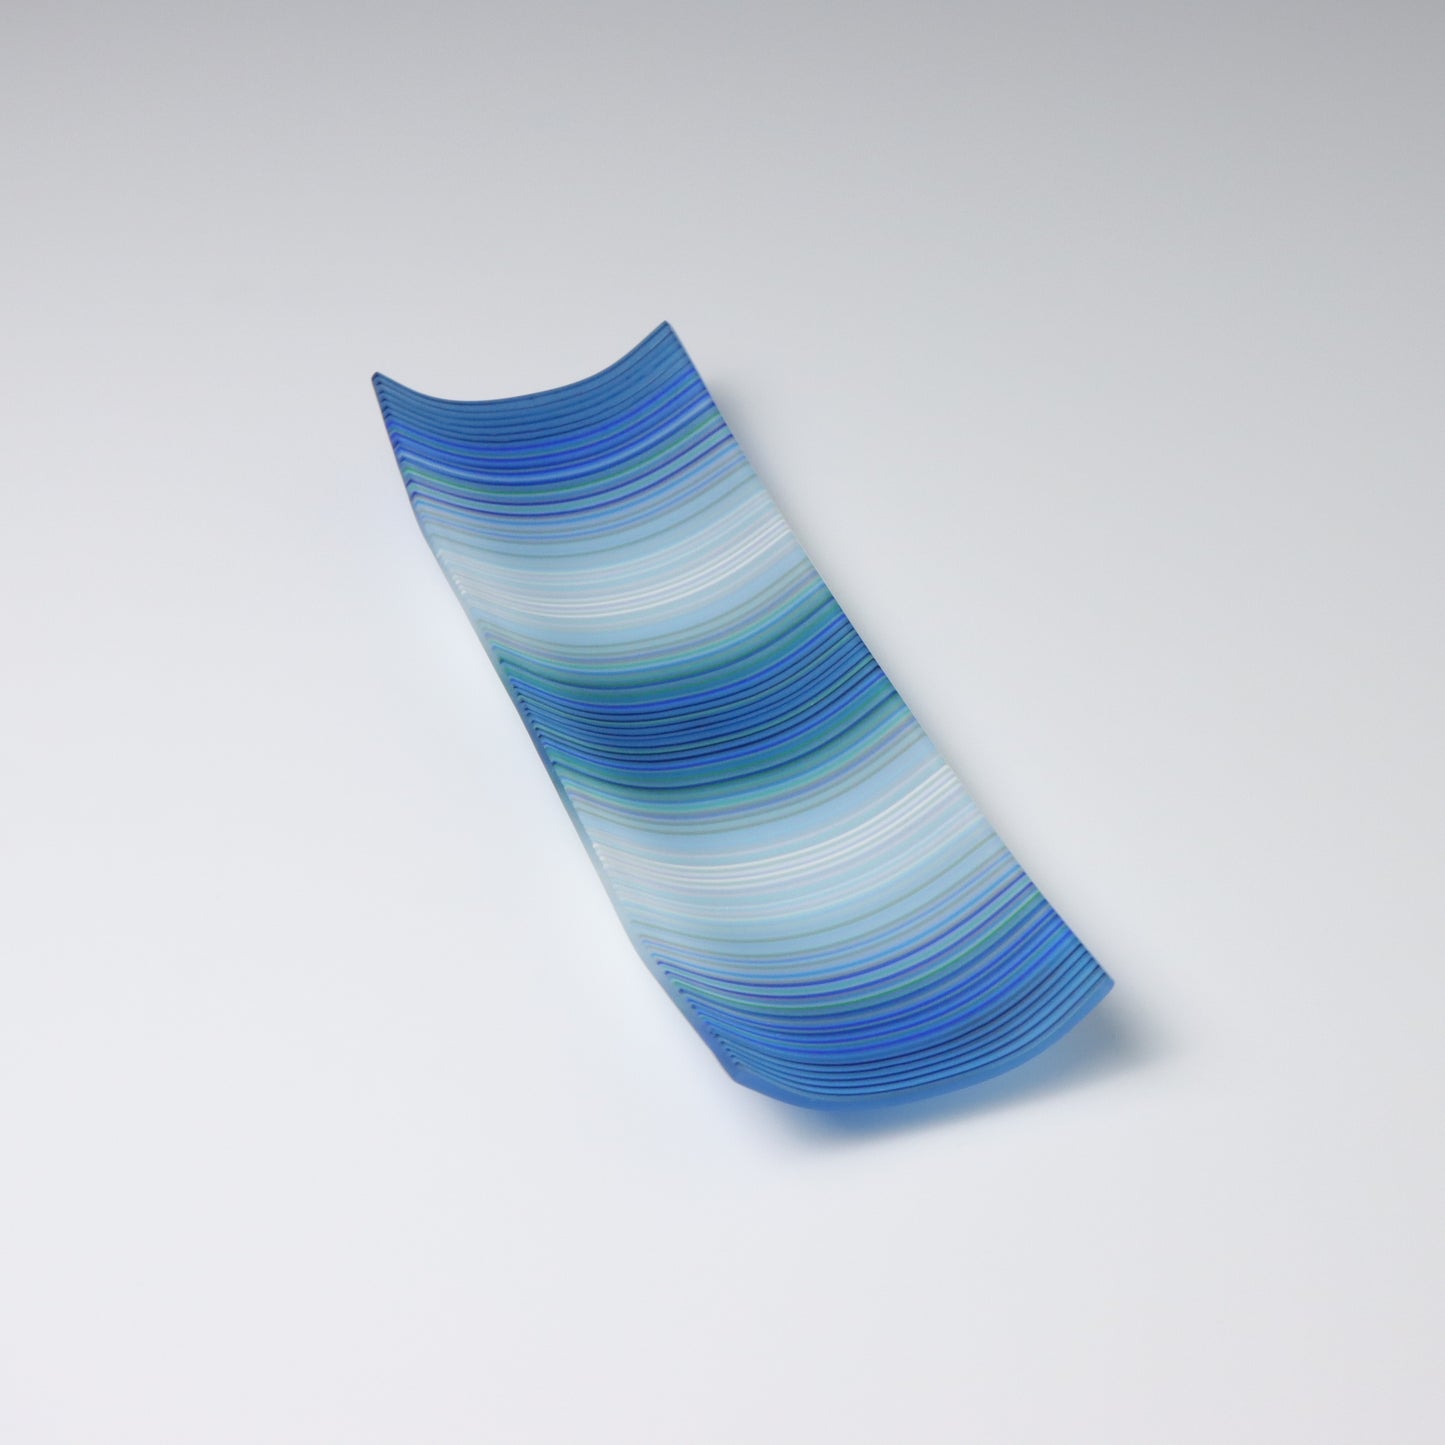 S127 | Rectangular Shaped ColourWave Glass Plate | Dark Blues and White